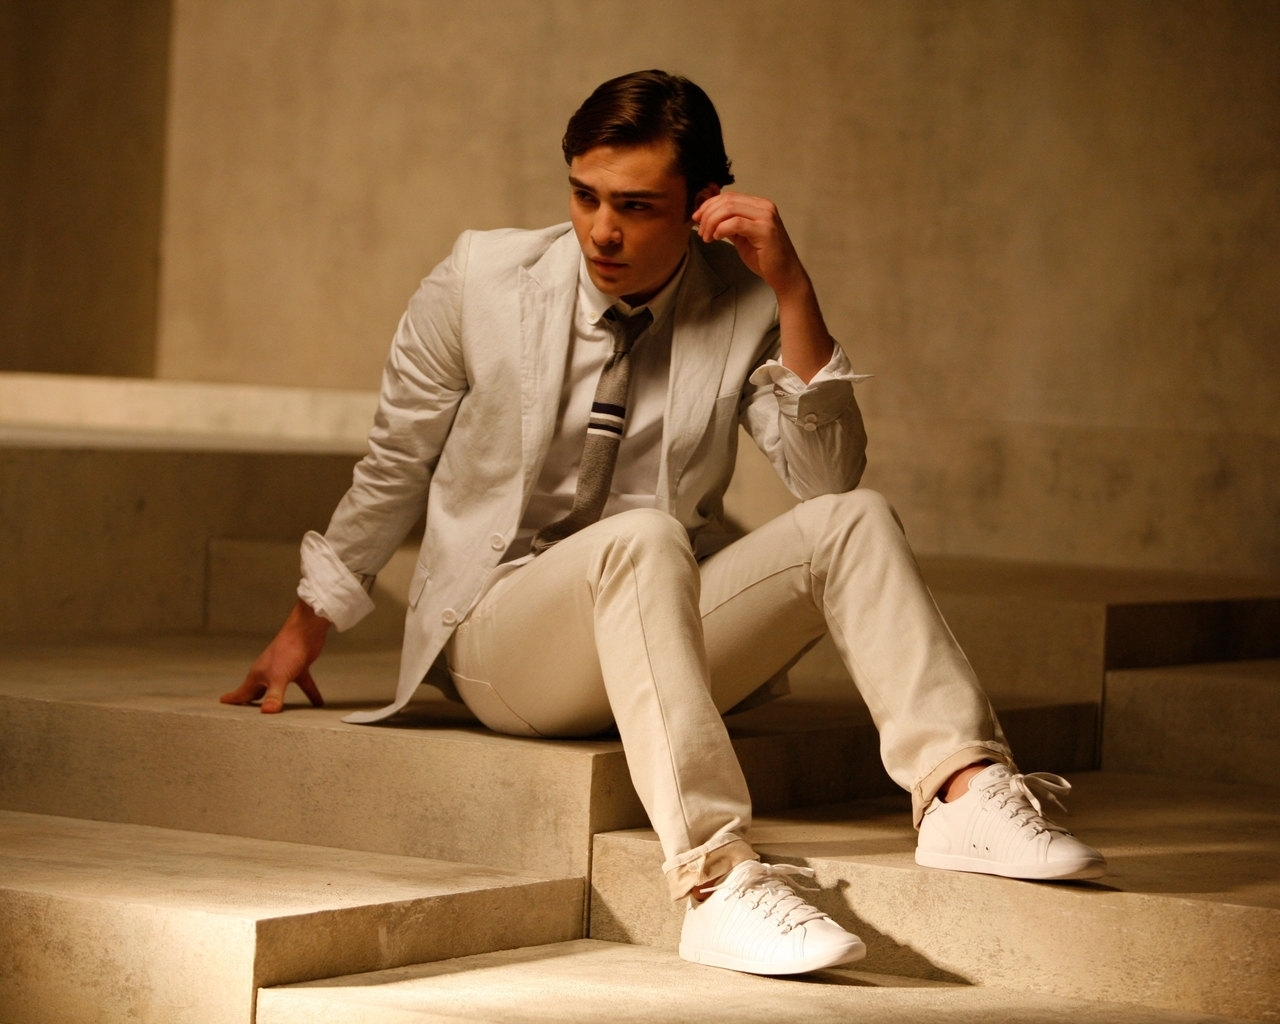 Ed Westwick Pure for 1280 x 1024 resolution